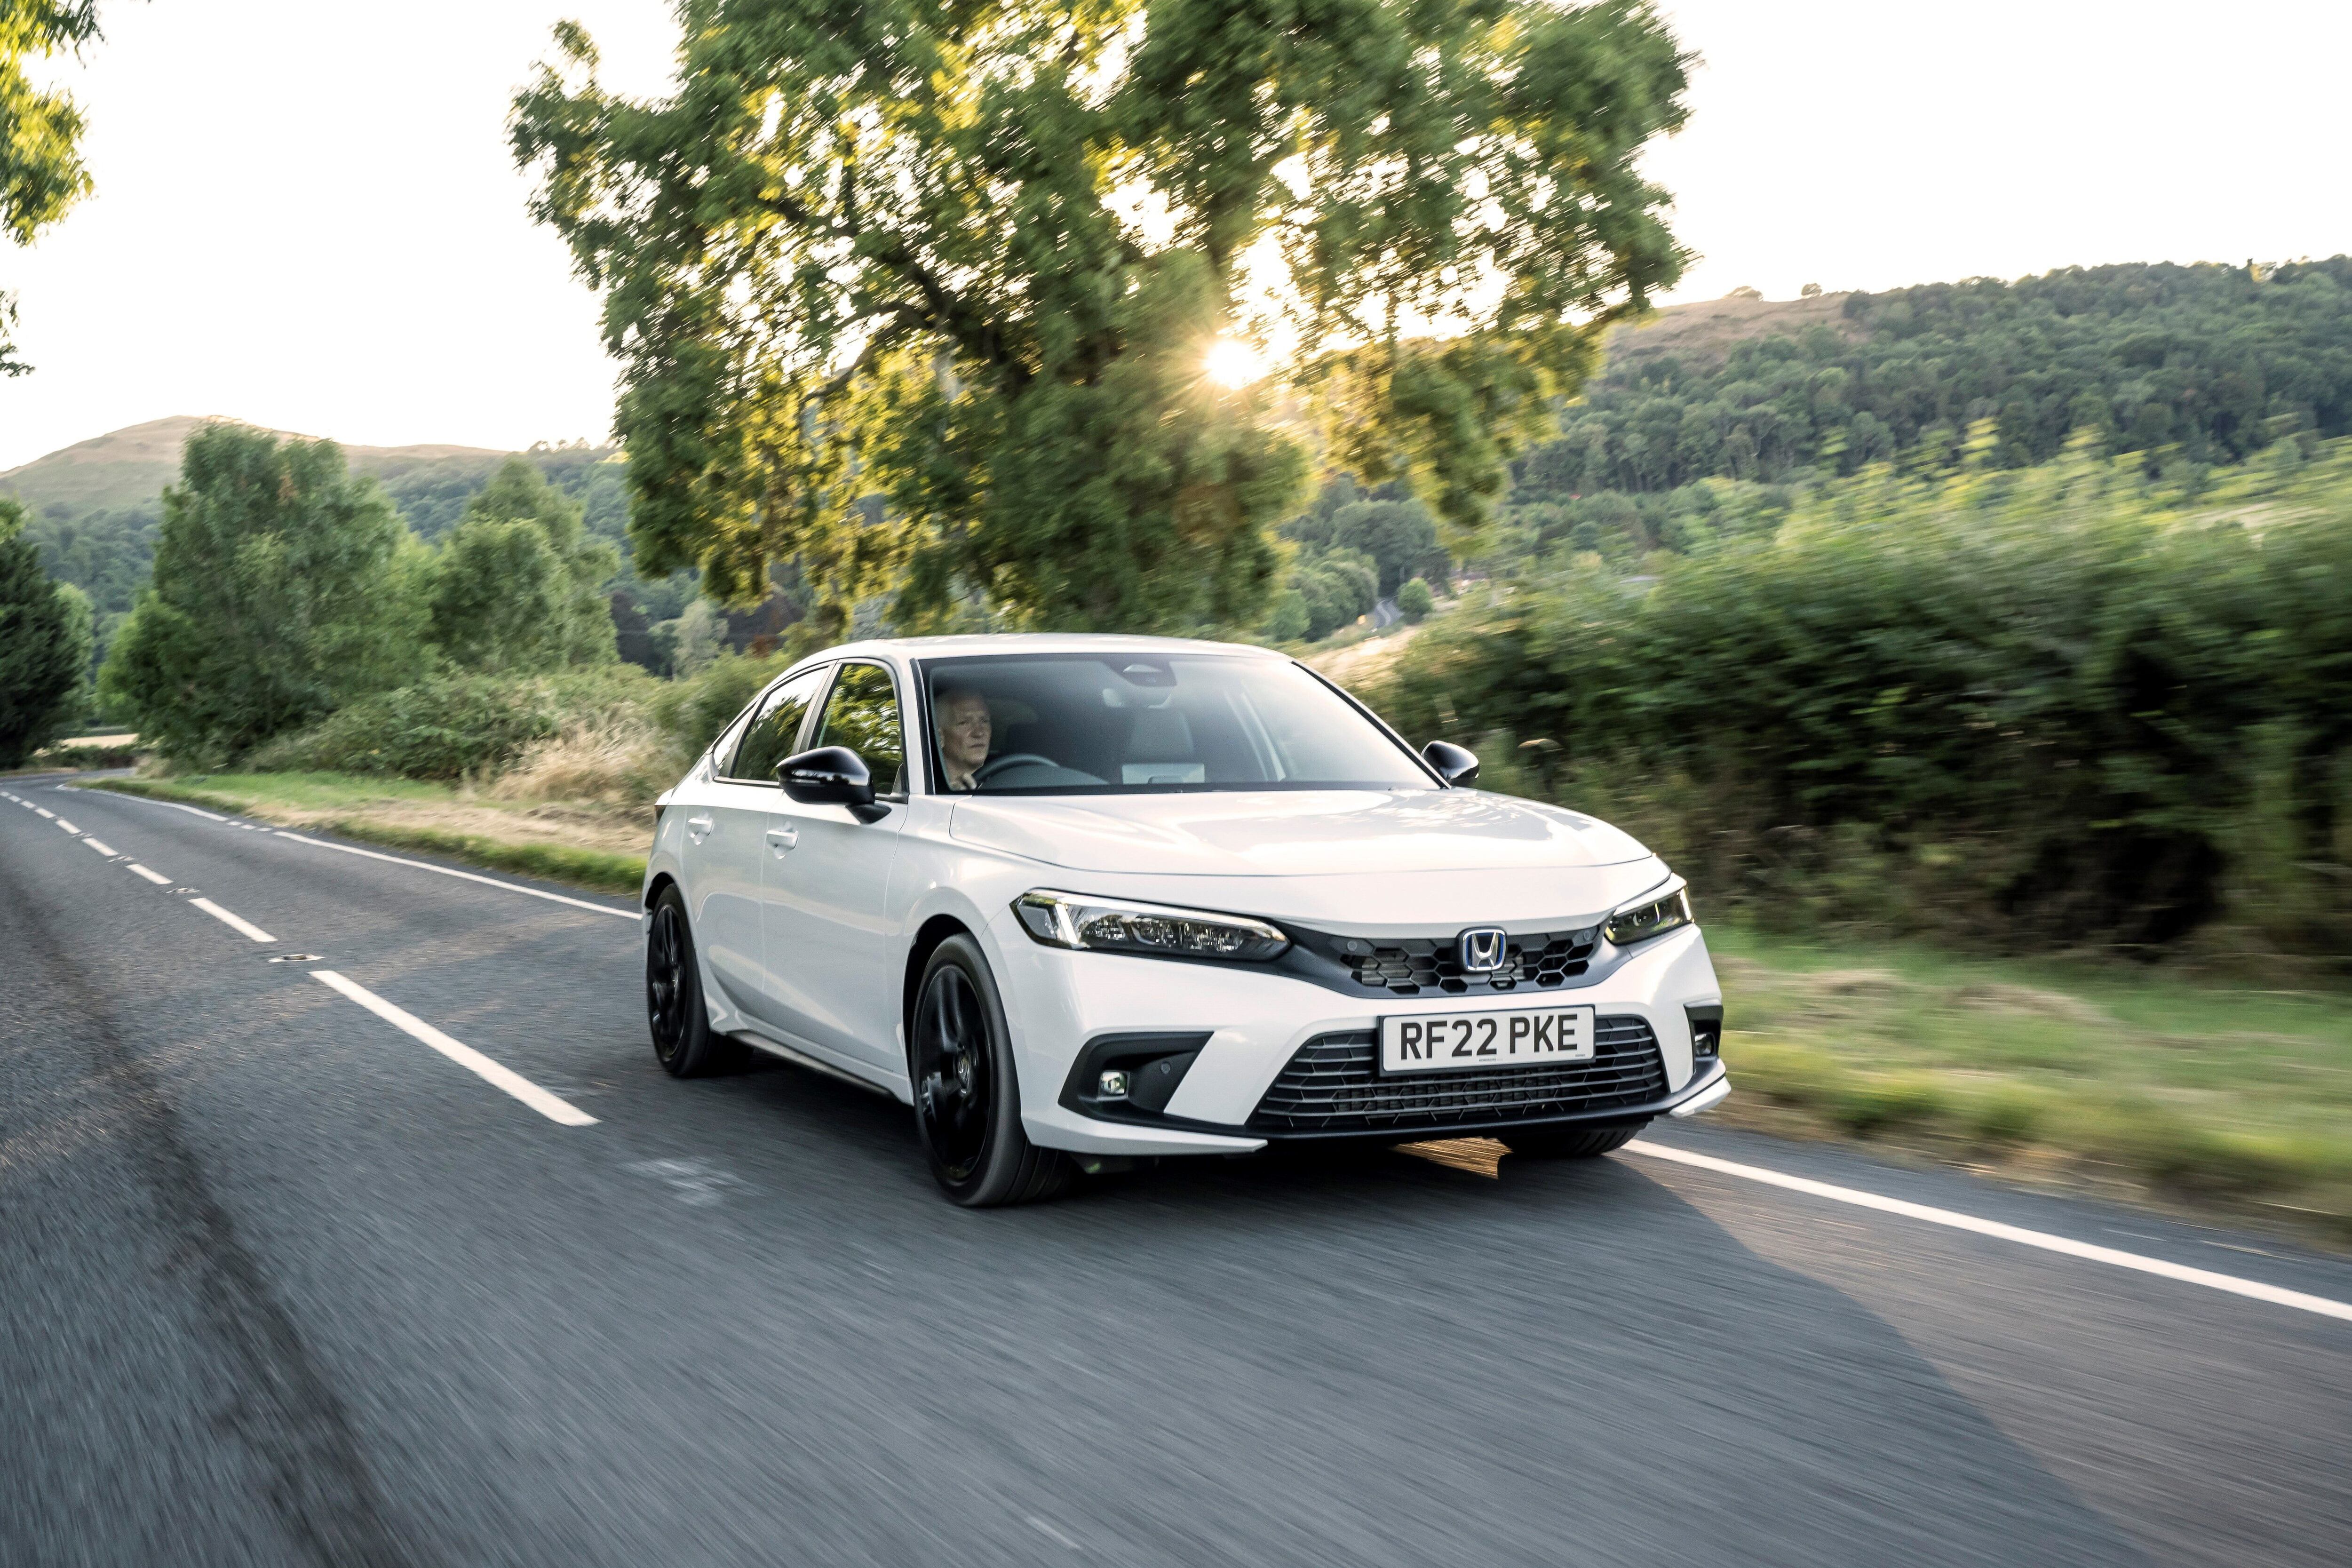 Honda Civic: Forget the Volkswagen Golf - the hybrid Civic is now